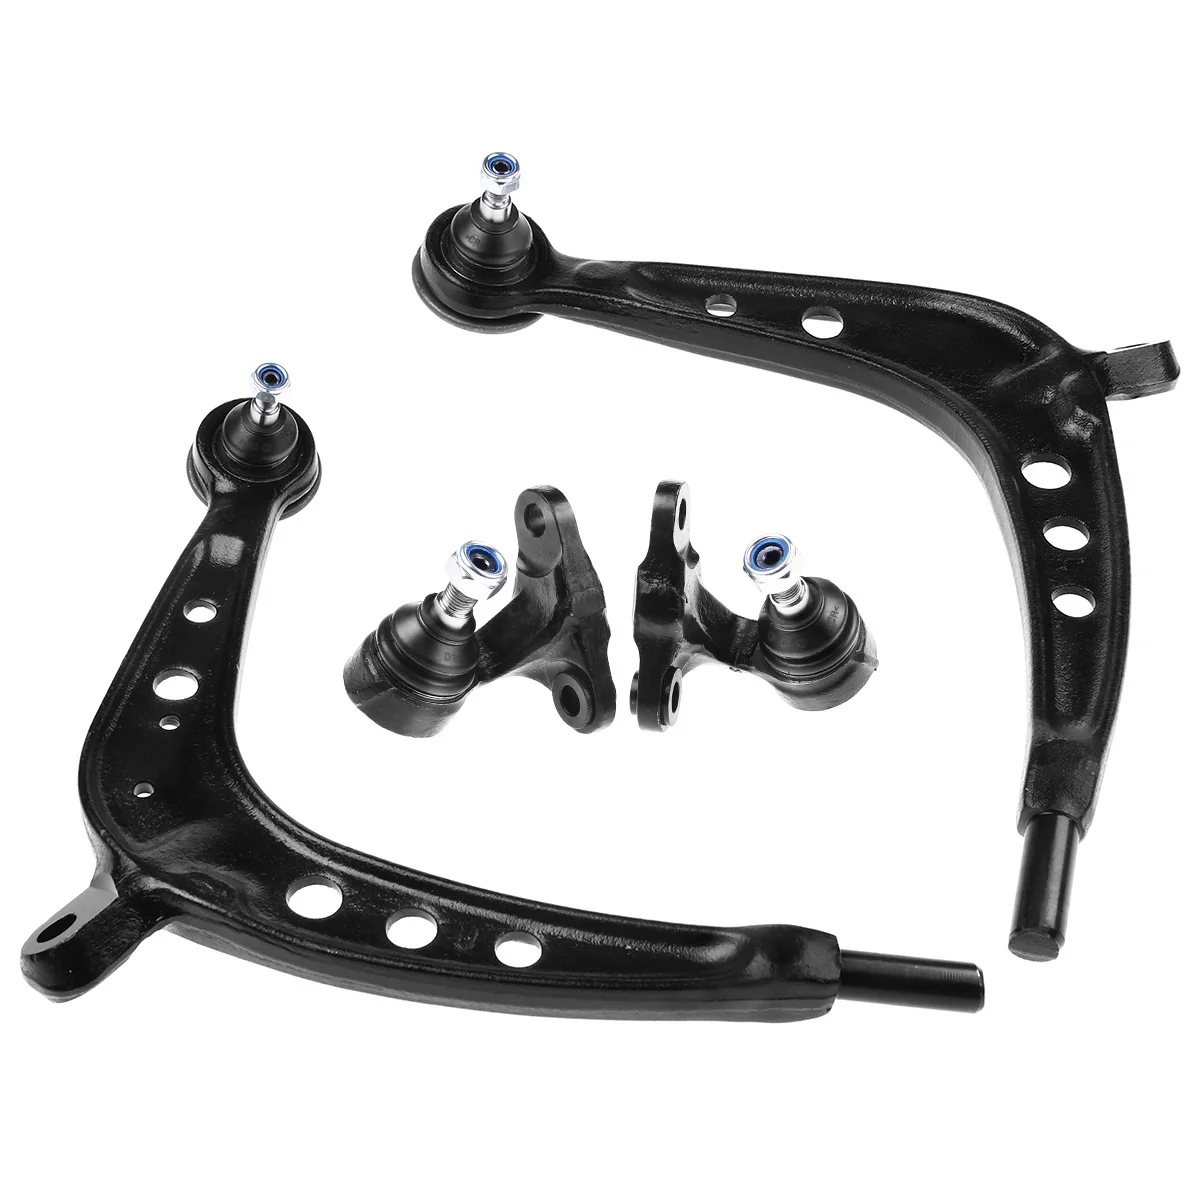 

A3 Repair Shop 4x Front Lower Control Arm Ball Joint for BMW 3 Series 325xi 330xi E46 2001-2005